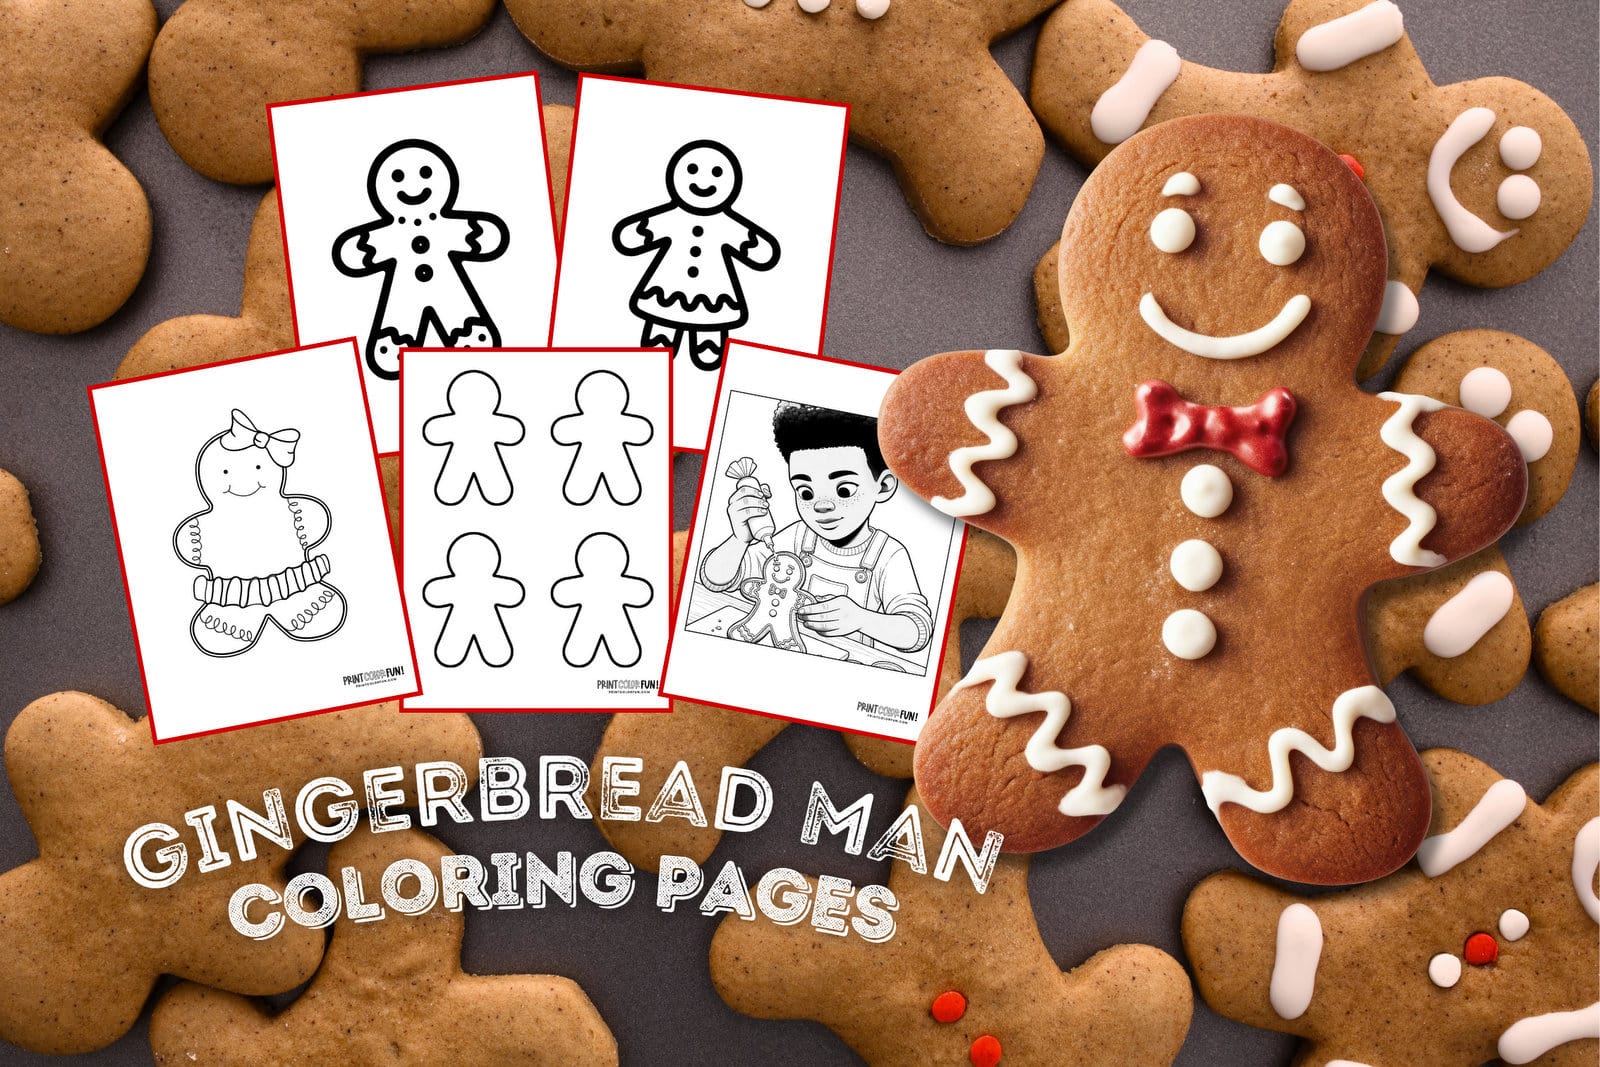 Gingerbread man coloring pages blank decorated printables for easy crafting learning fun at